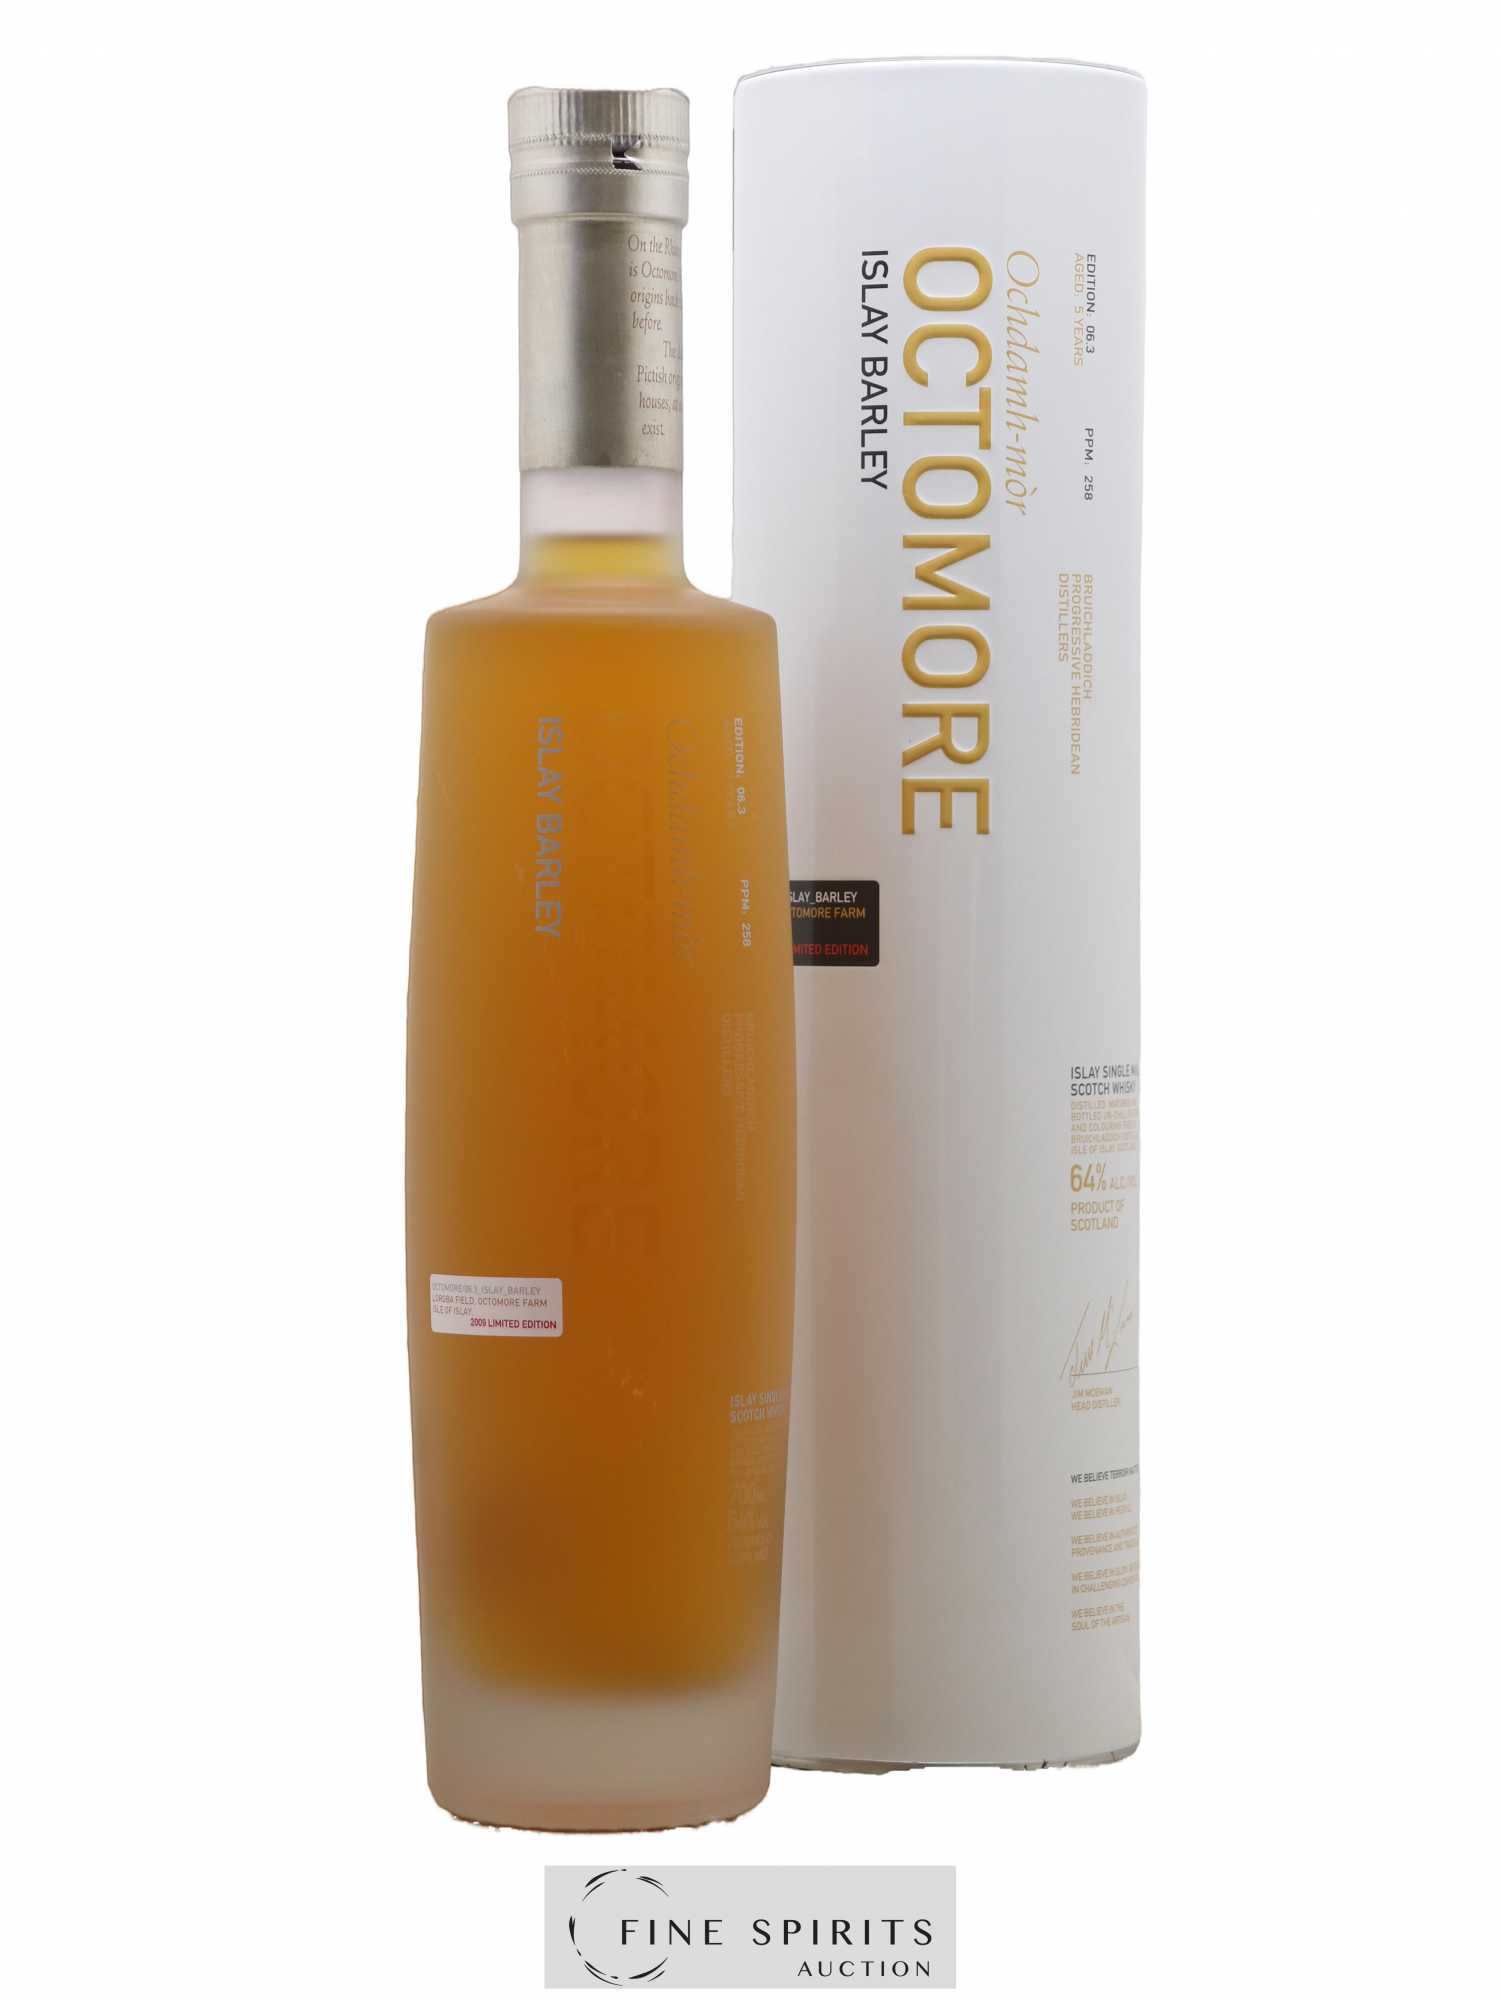 Octomore 5 years Of. Edition 06.3 Islay Barley 2009 Limited Edition 